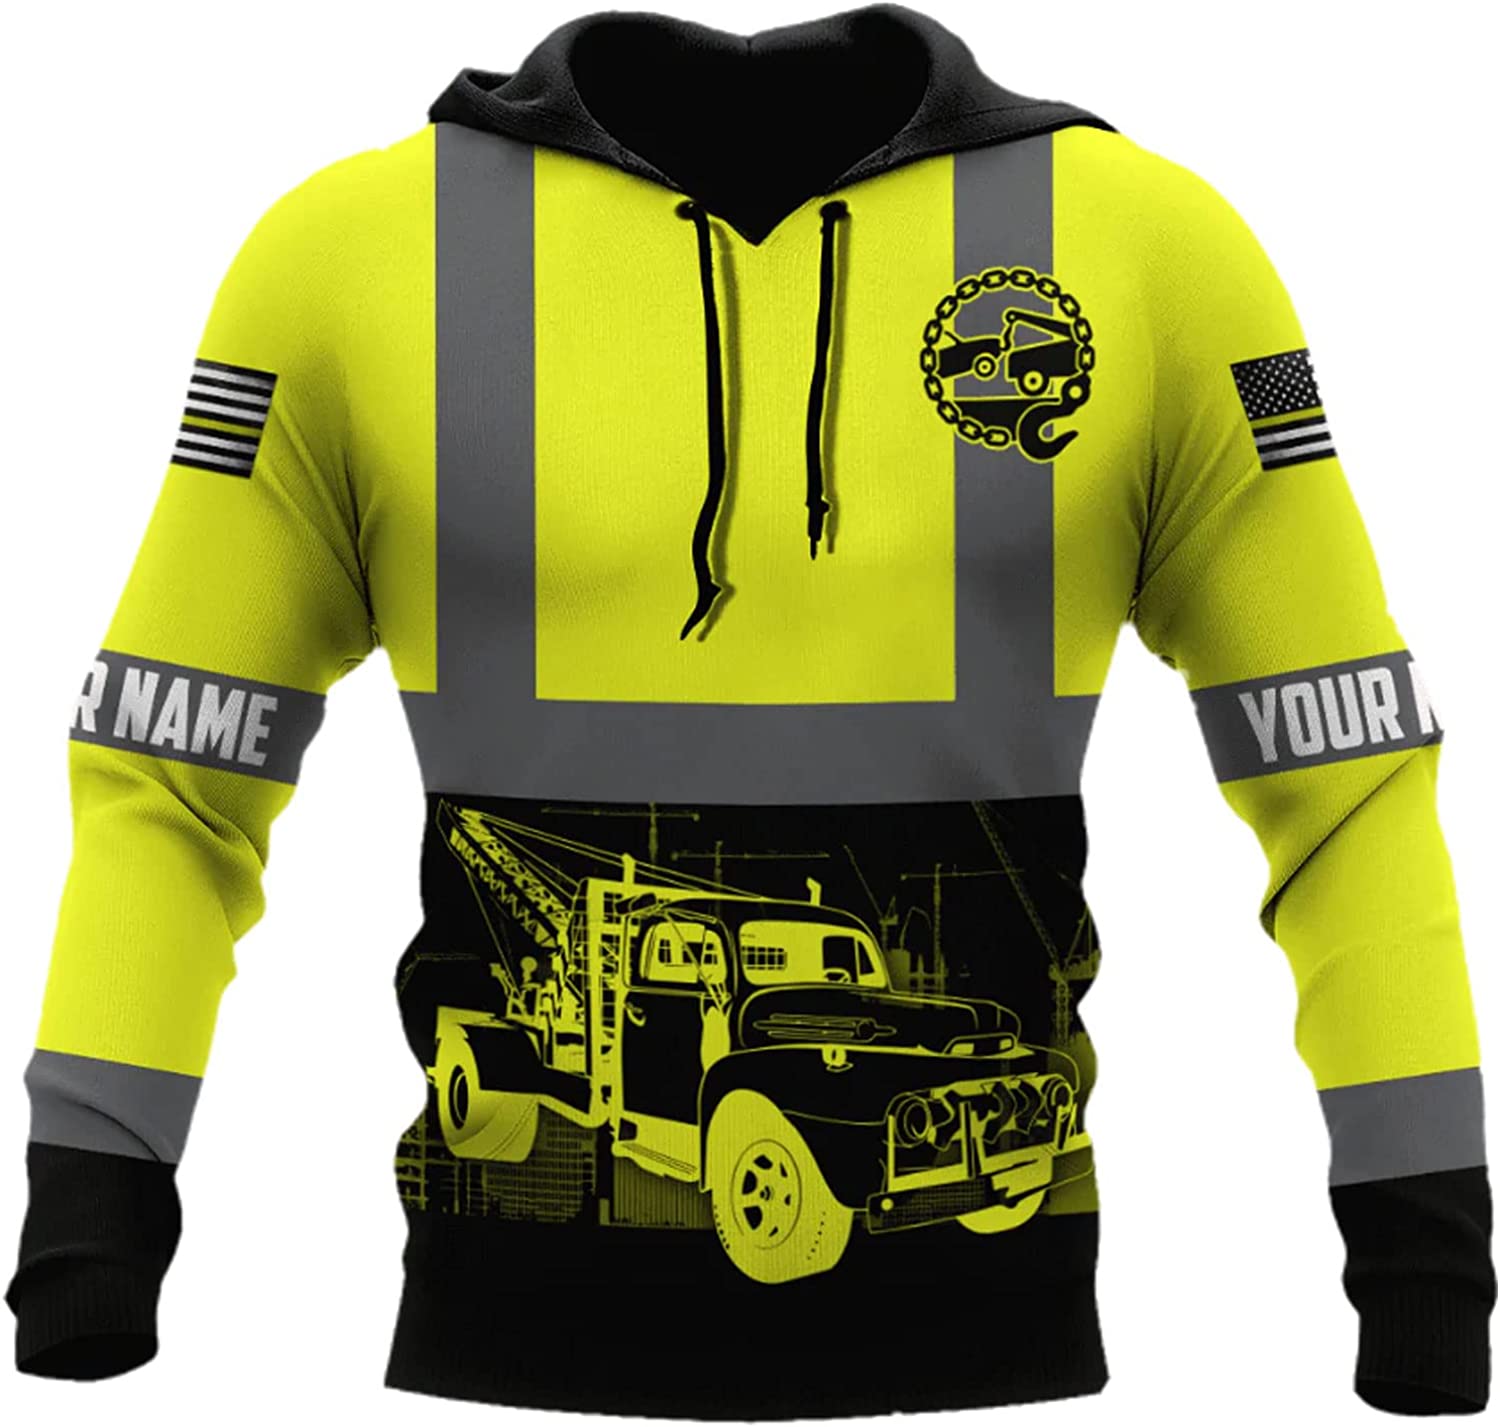 customized 3d printed tow truck shirt a unique gift for tow truck enthusiasts baseball players and more! available in hawaiian sweatshirt hoodie and zip hoodie styles with over printing. jot ytxmv